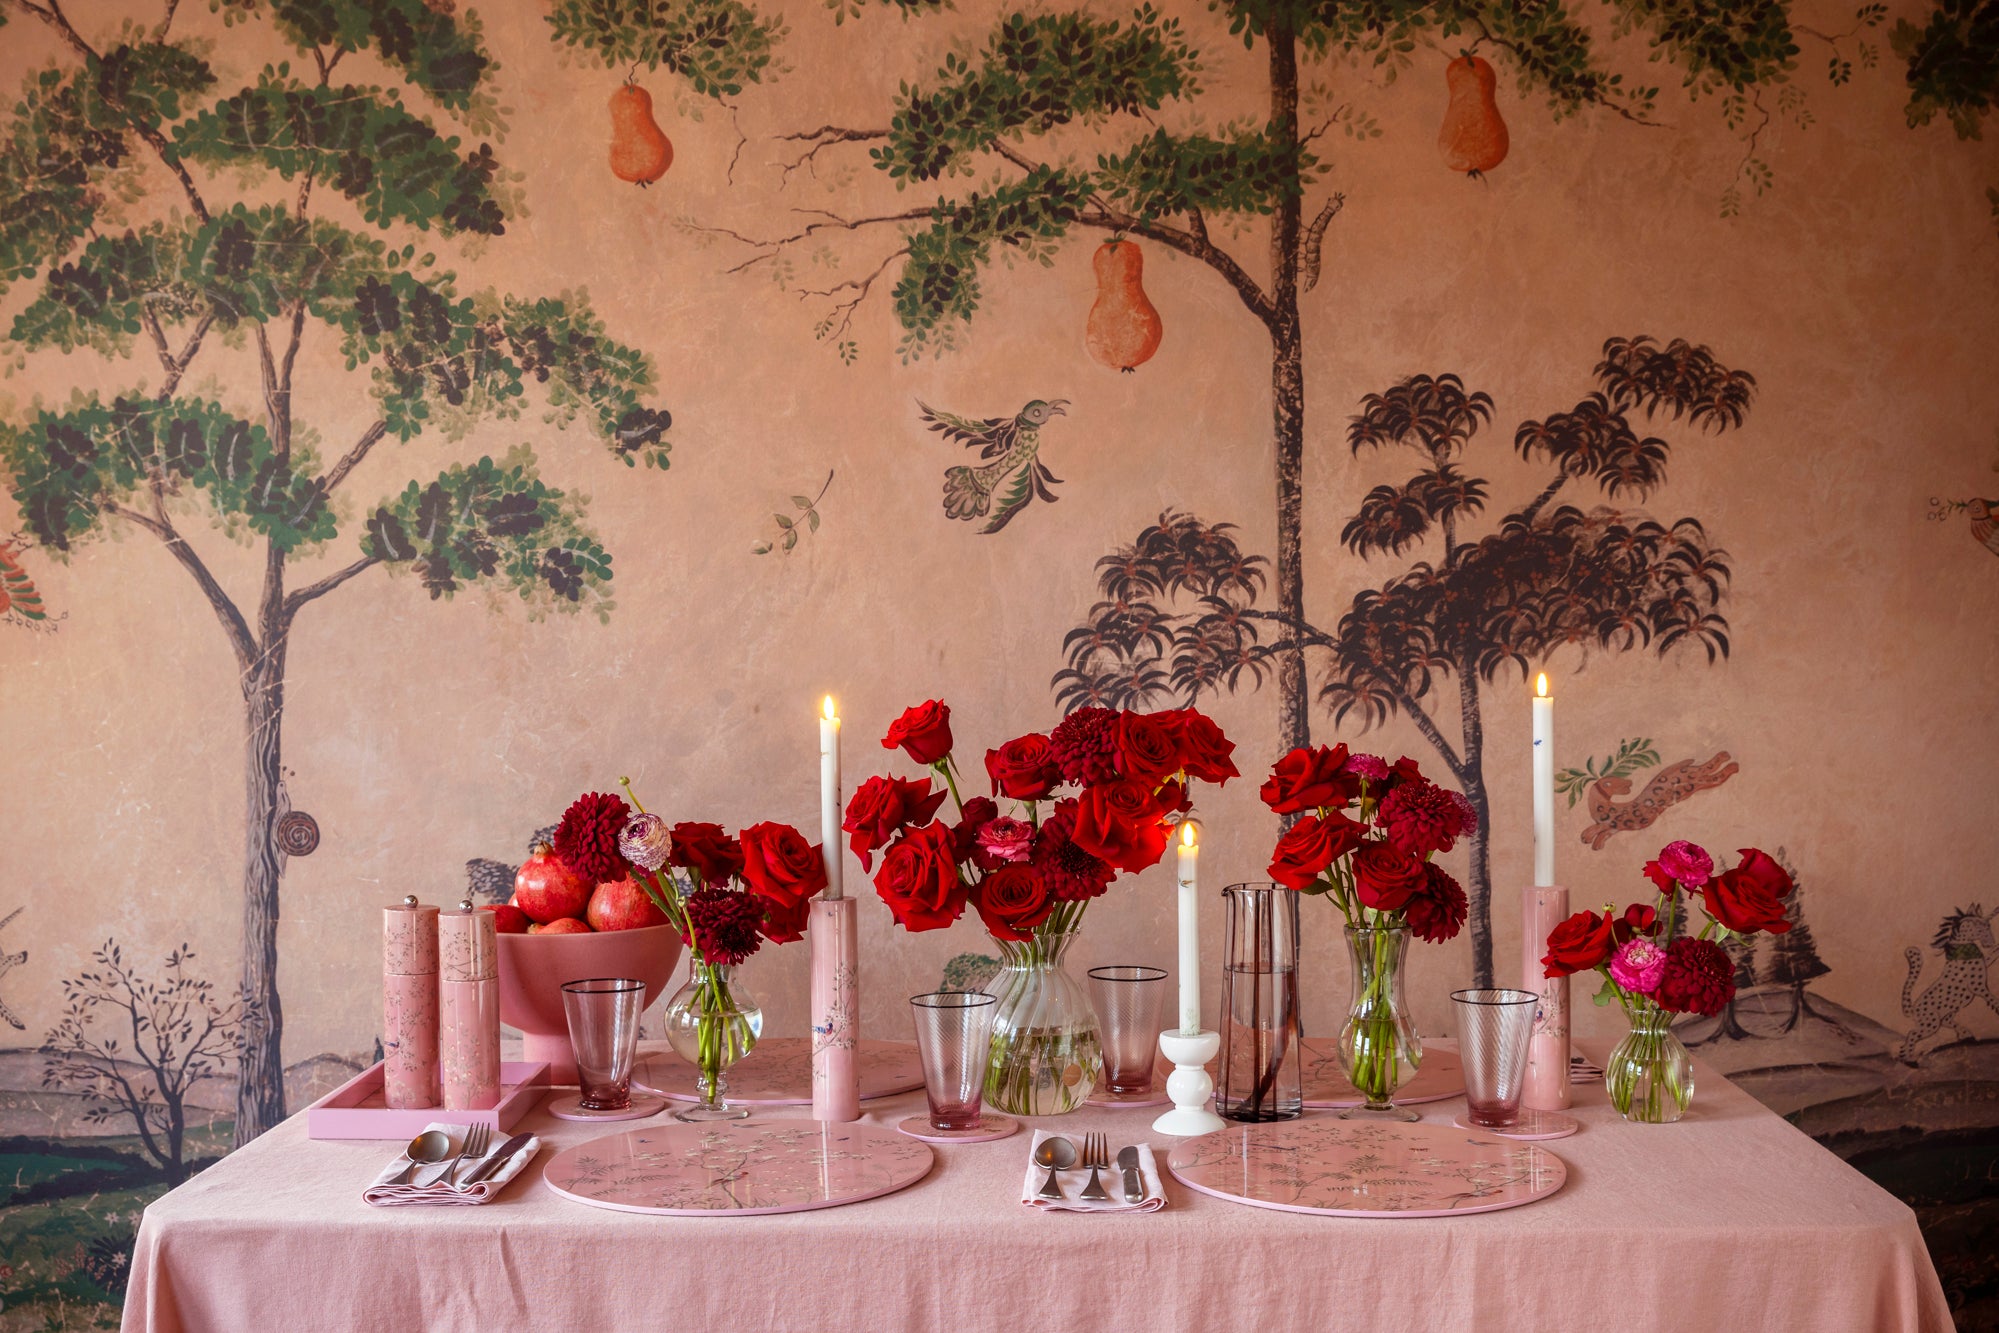 The same undertone but creating a beautiful contrast: the Addison Ross chinoiserie collection, with Andrew Martin wallpaper